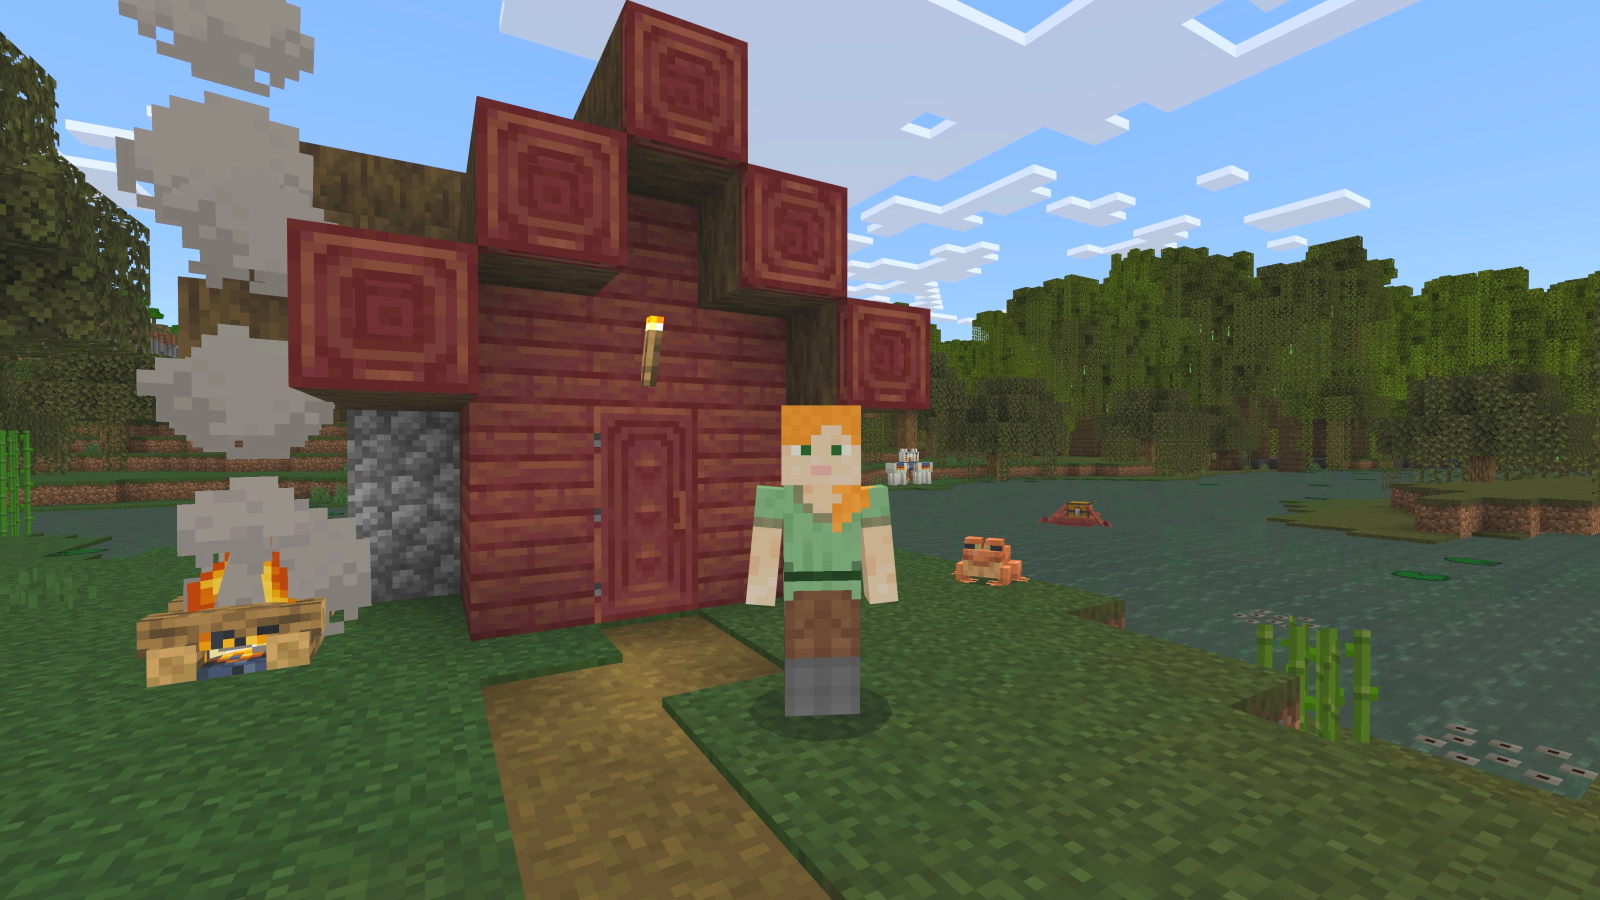 A Minecraft Screenshot, showing a character near a Mangrove swamp and a house